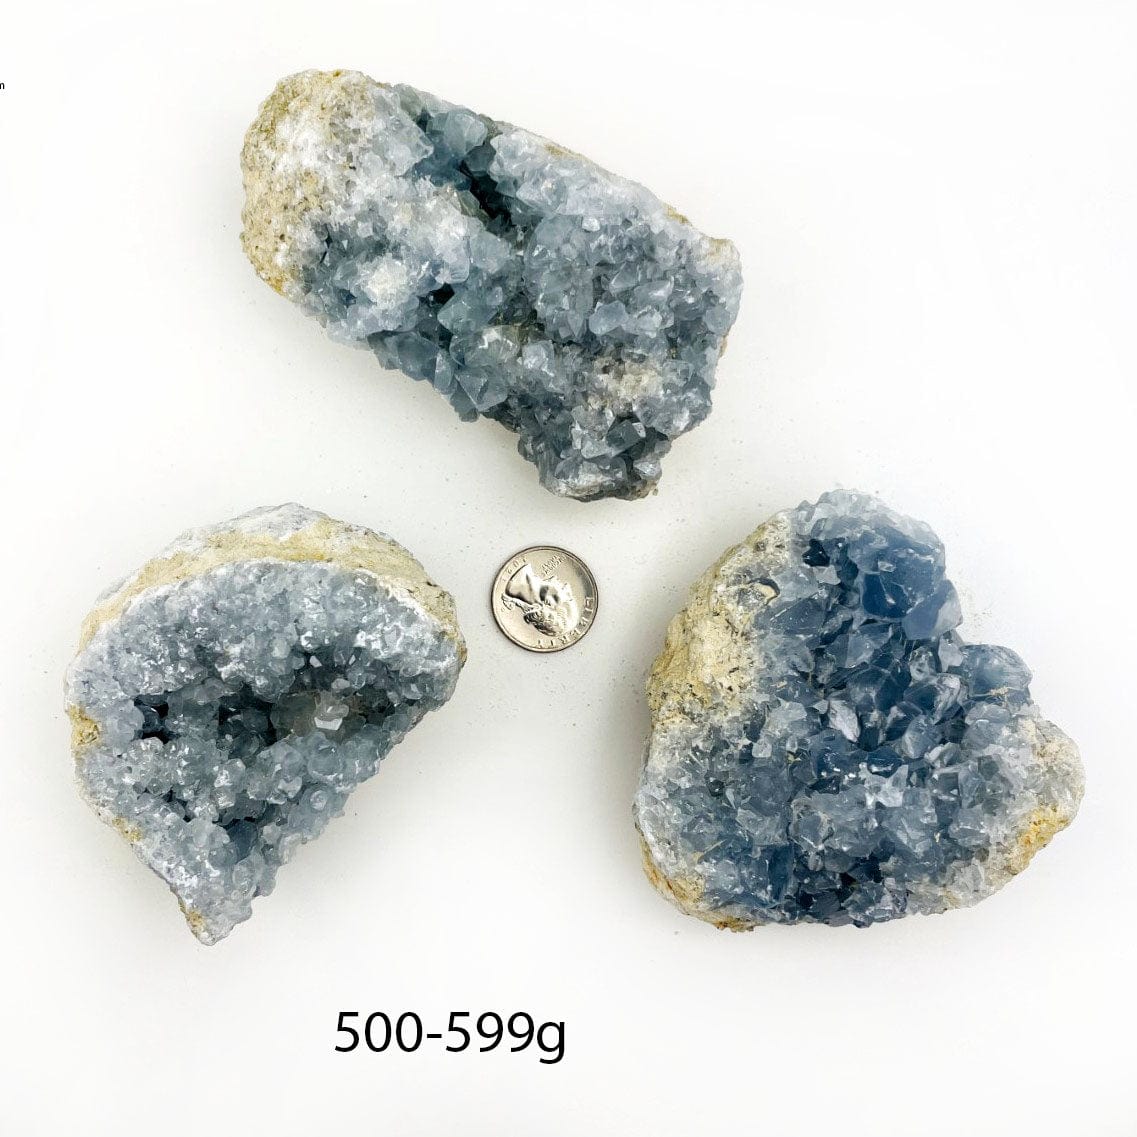 Celestite Crystals in size 500-599g next to a quarter for size reference